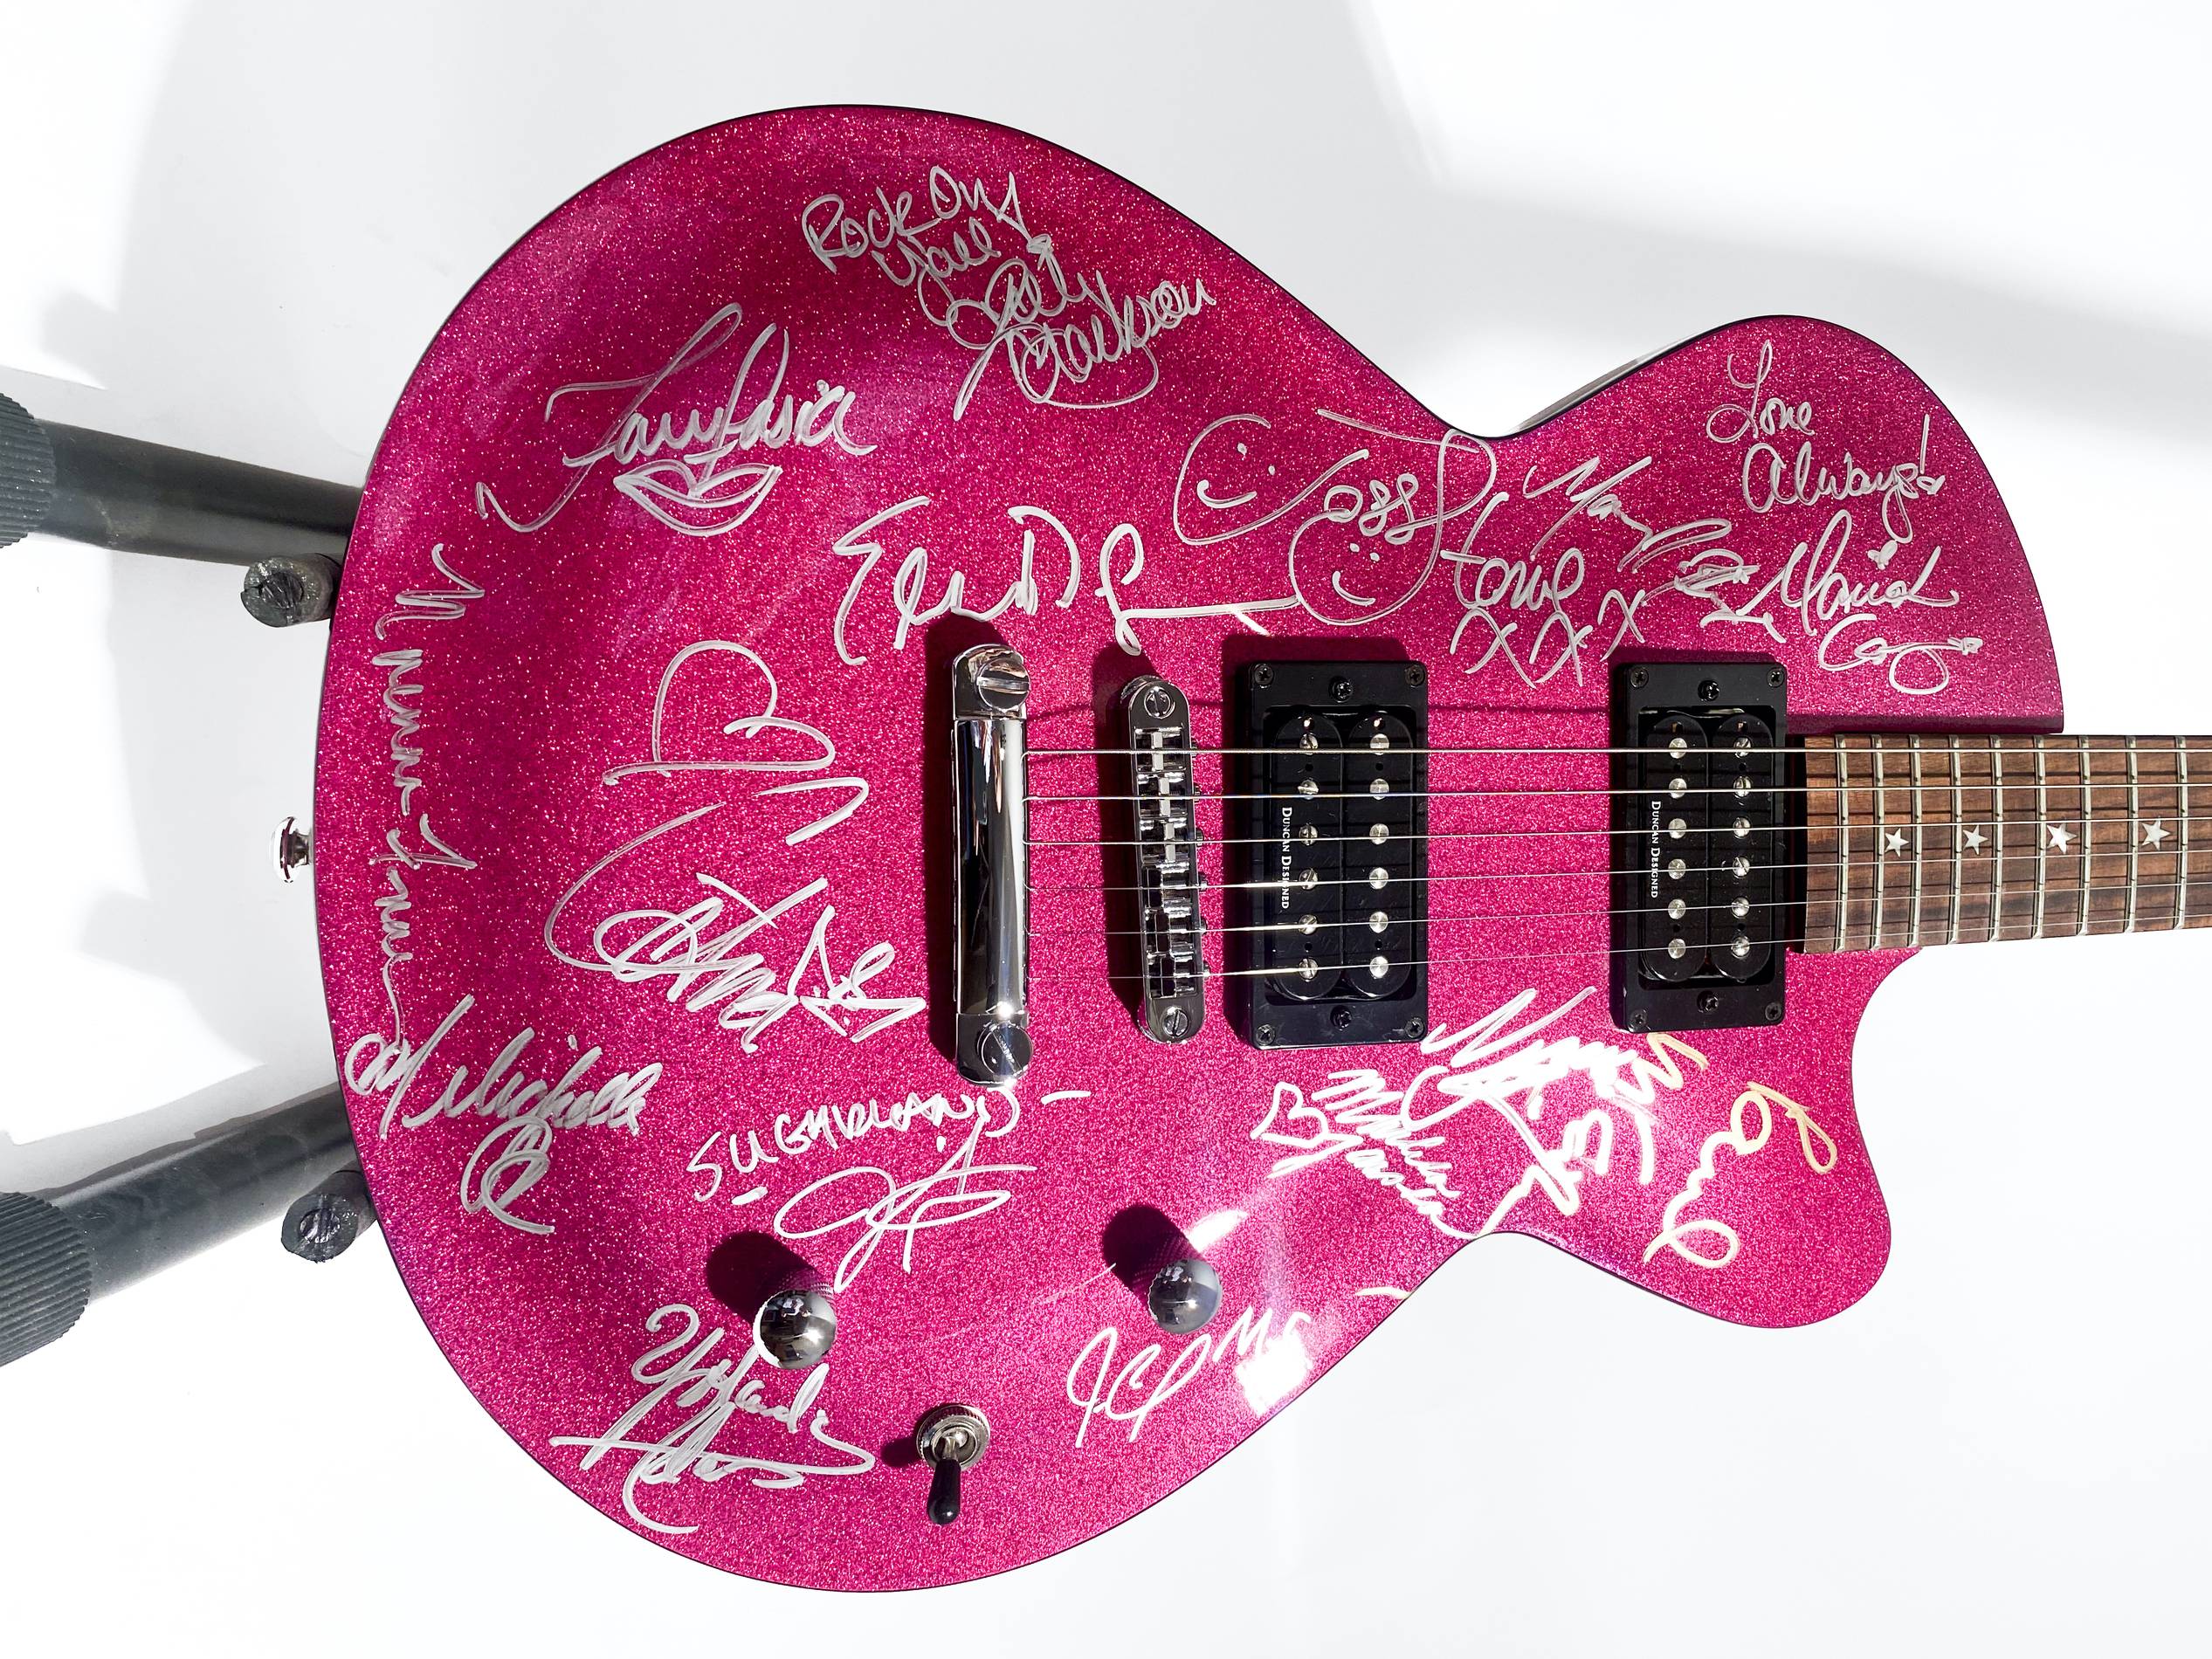 Guernsey's Auction Offers Iconic Guitars From McCartney, Eddie Van Halen More